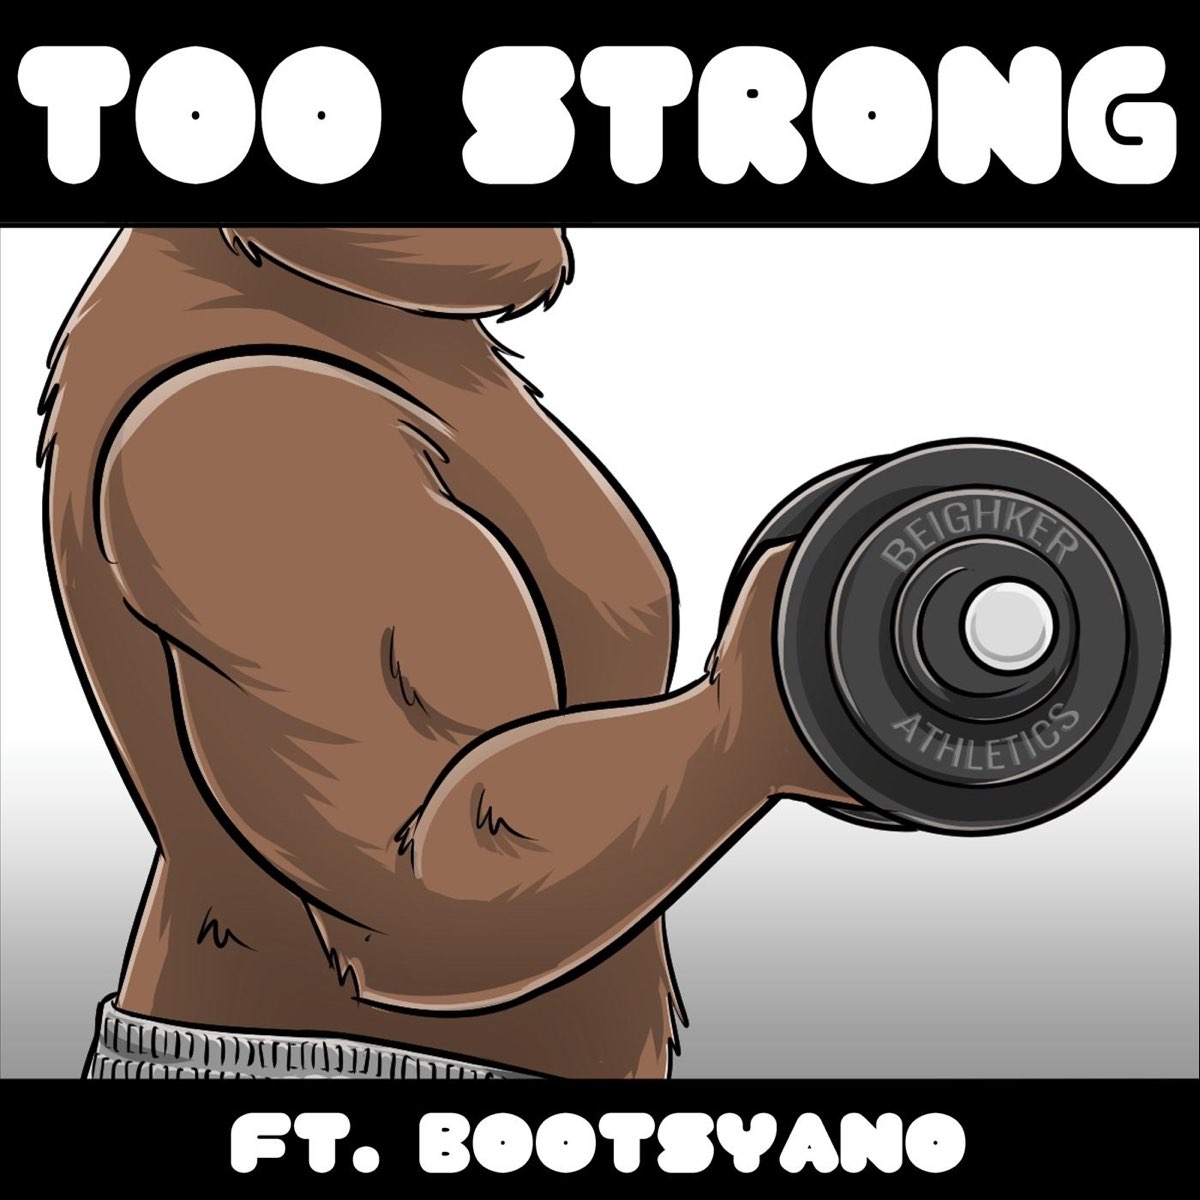 Too strong.